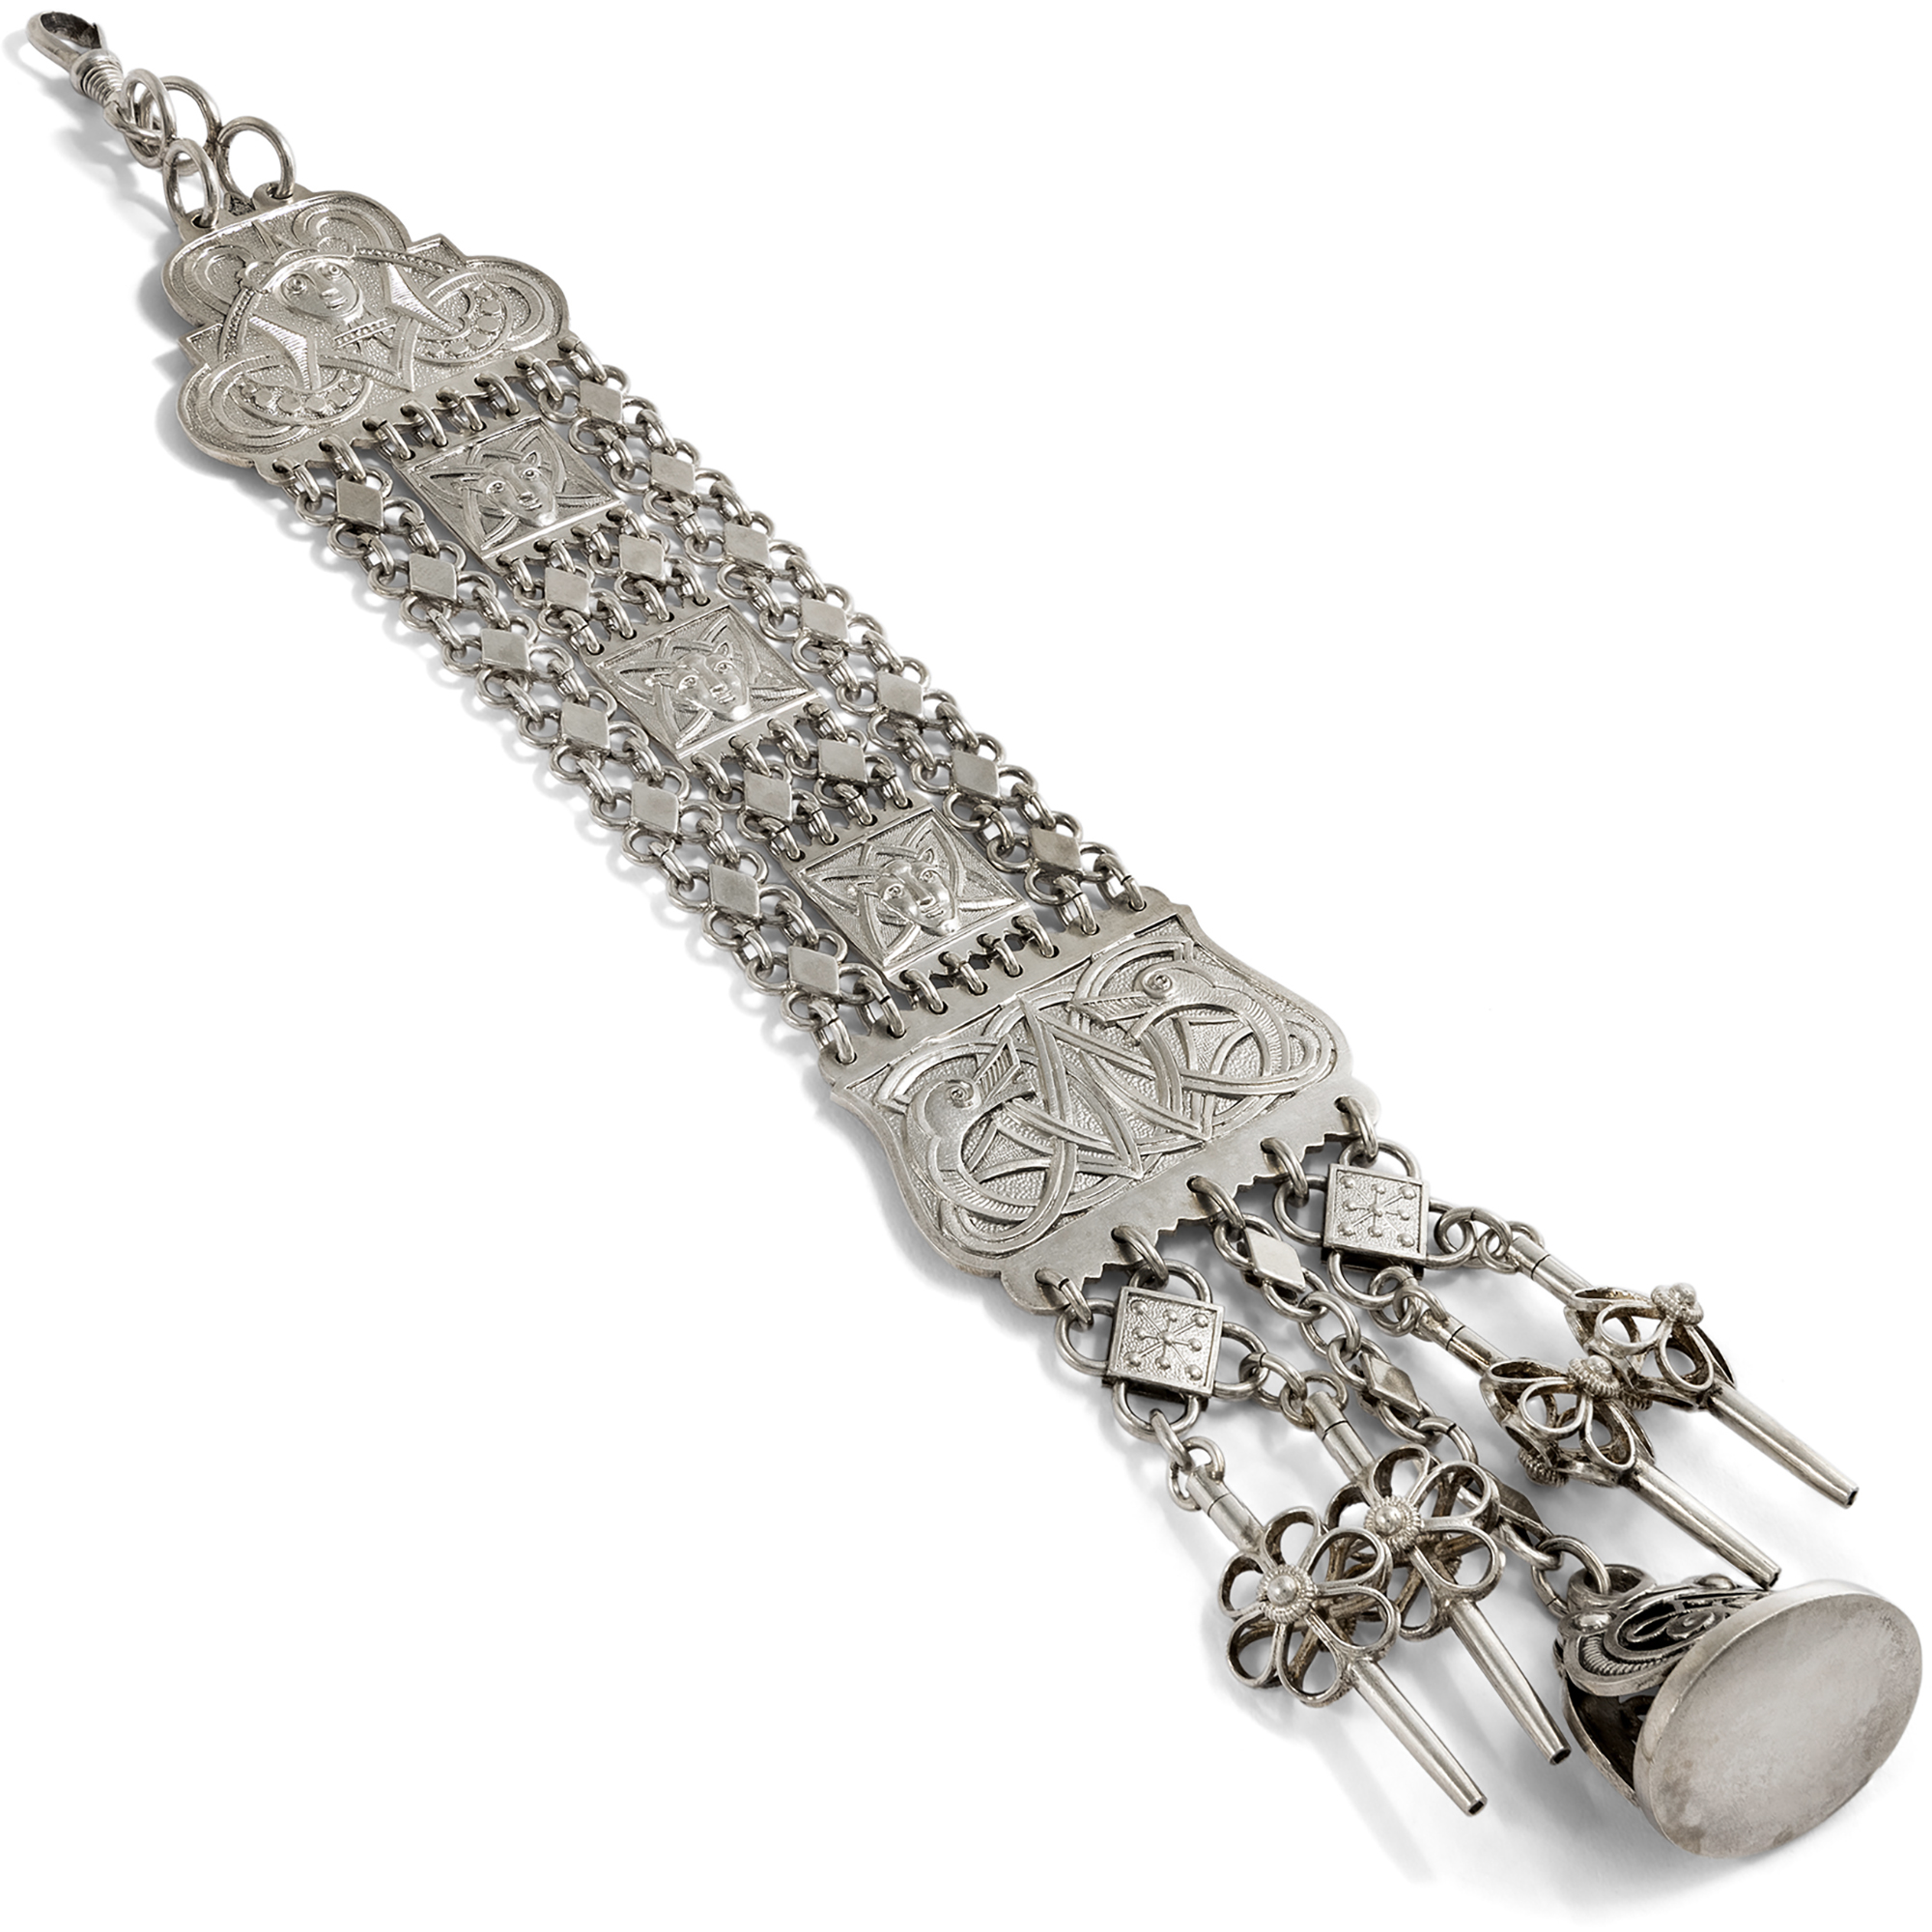 Antique silver chatelaine by David-Andersen, Olso Around 1910